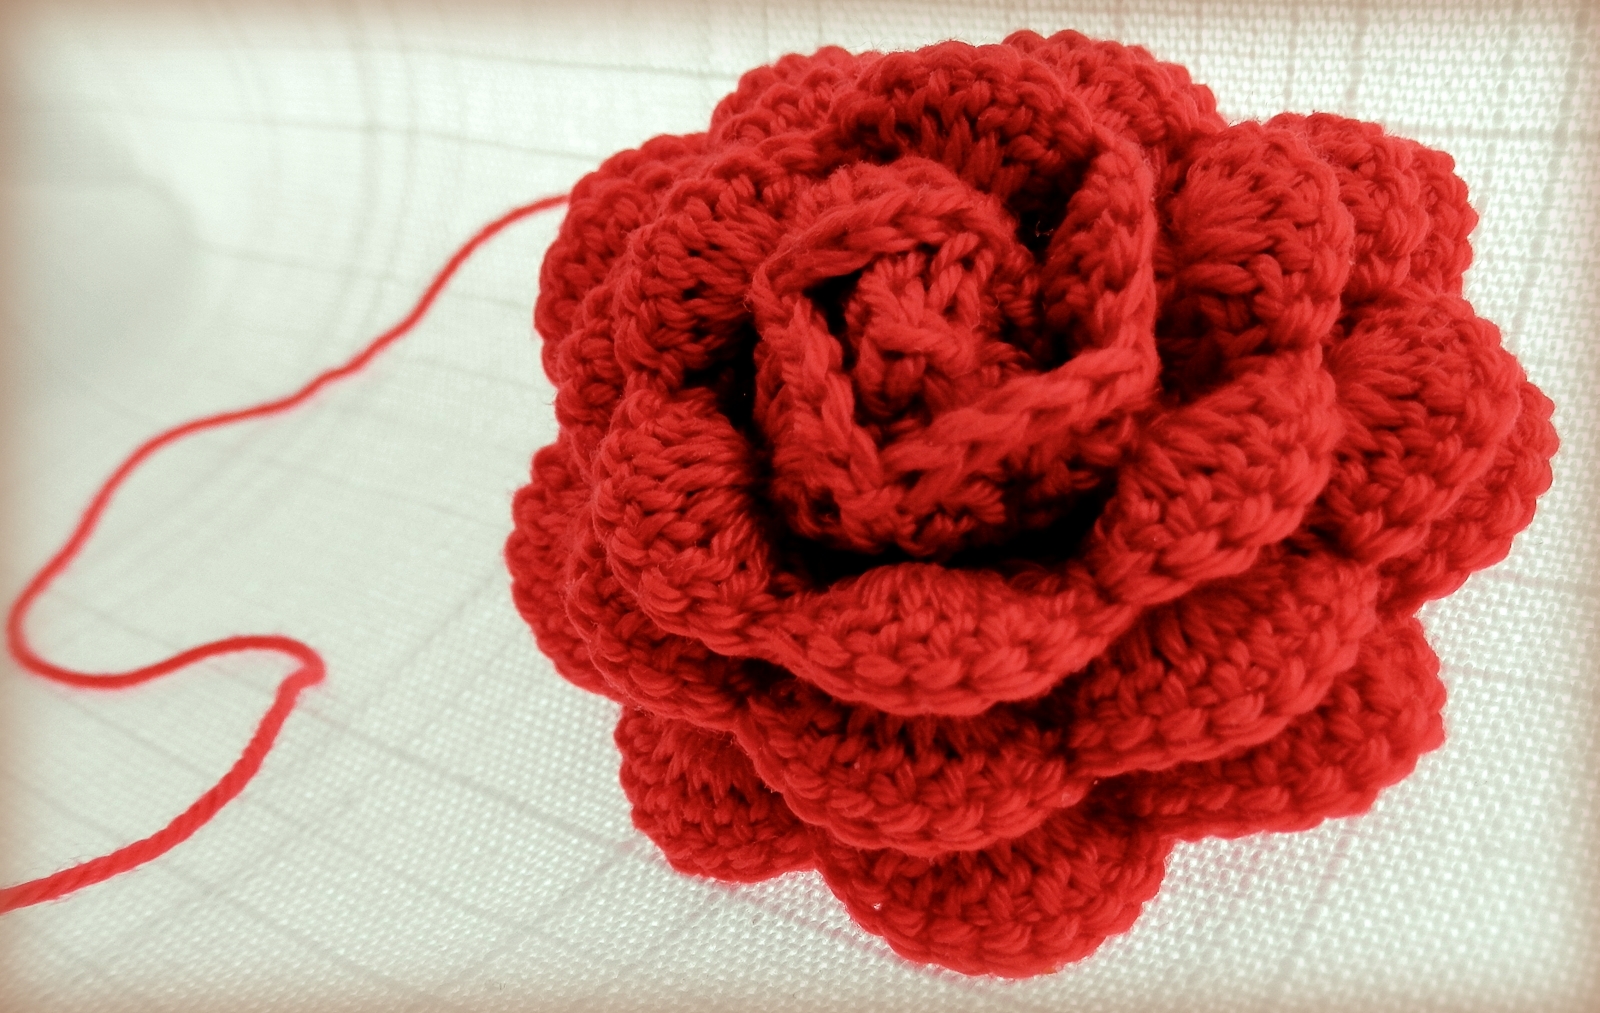 Crochet Rose Pattern And Step By Step Tutorial Tutorials And More